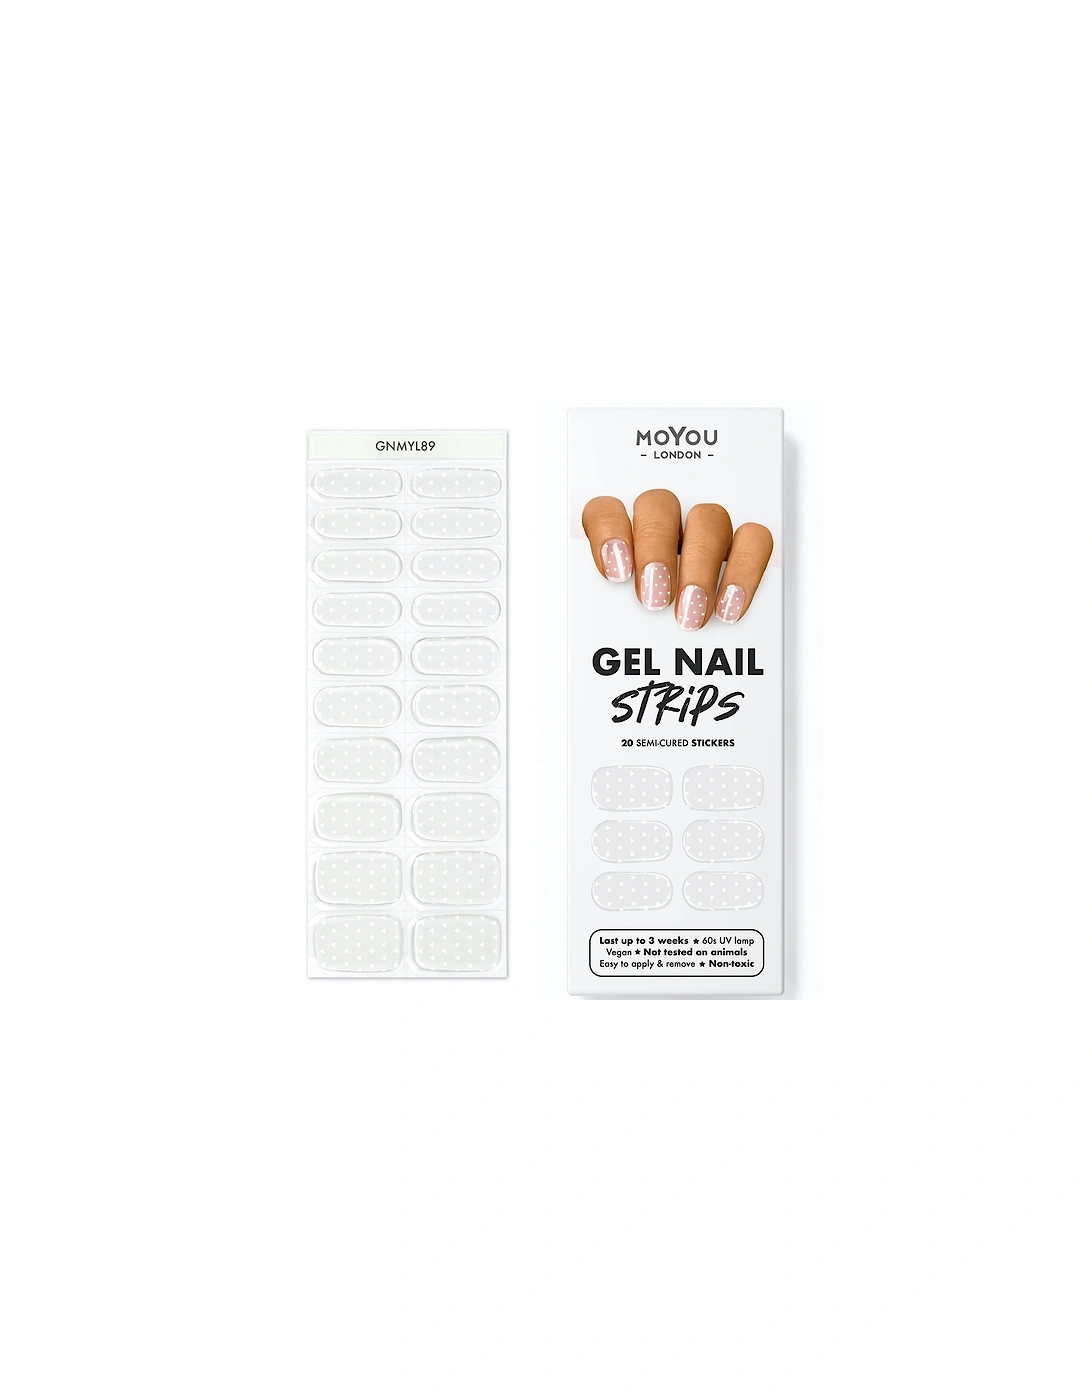 Gel Nail Strip - Heart to Get, 2 of 1